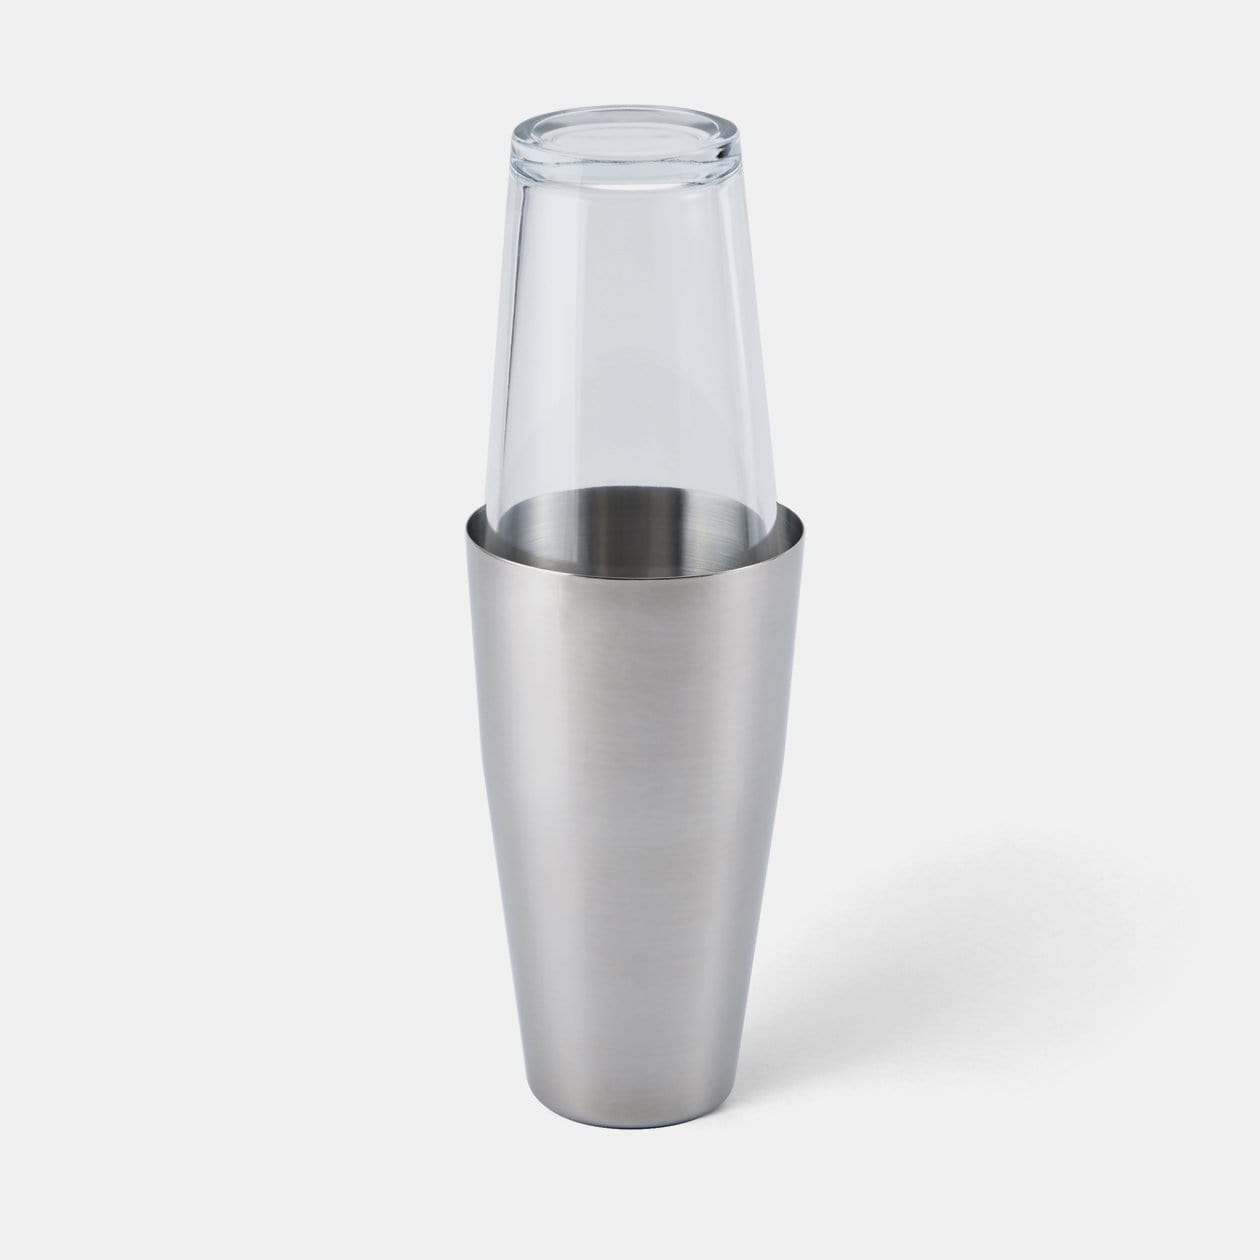 glass cocktail shaker